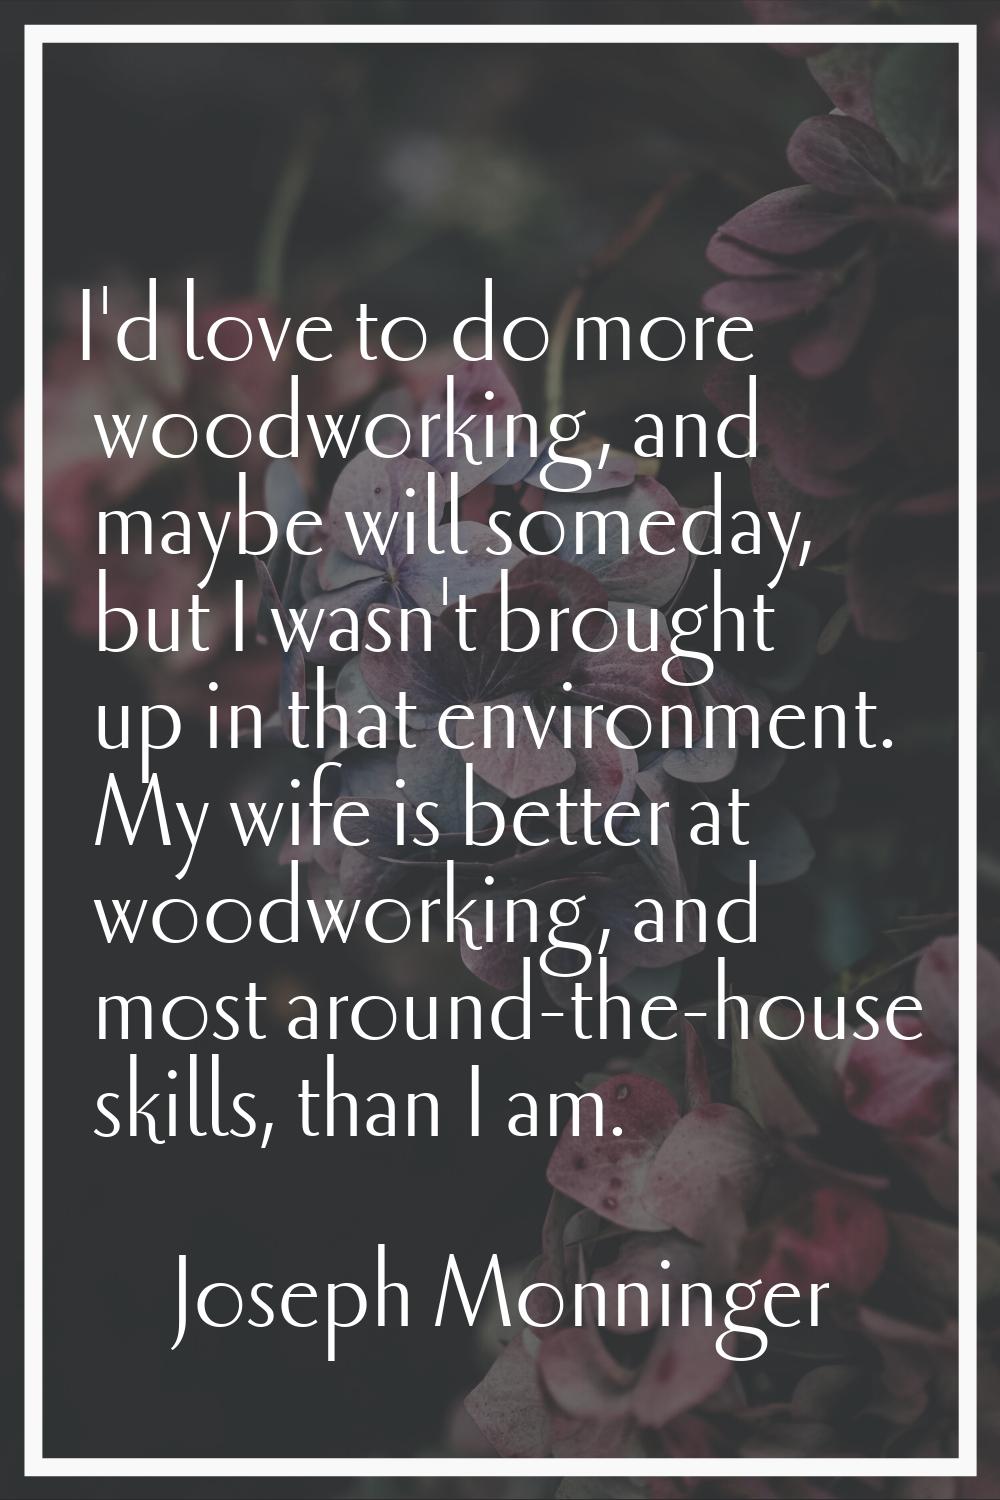 I'd love to do more woodworking, and maybe will someday, but I wasn't brought up in that environmen